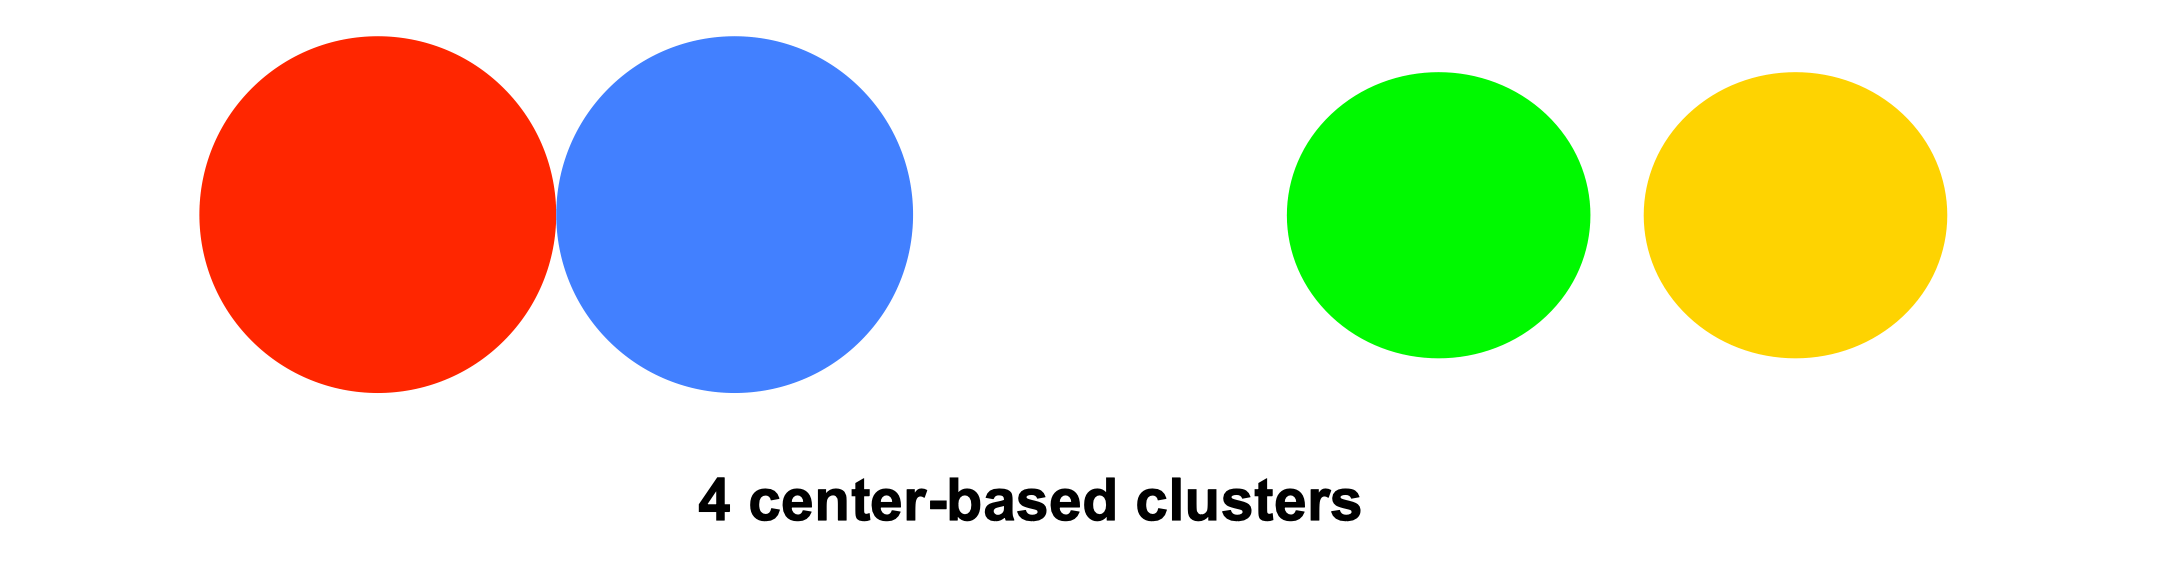 center_based_clusters